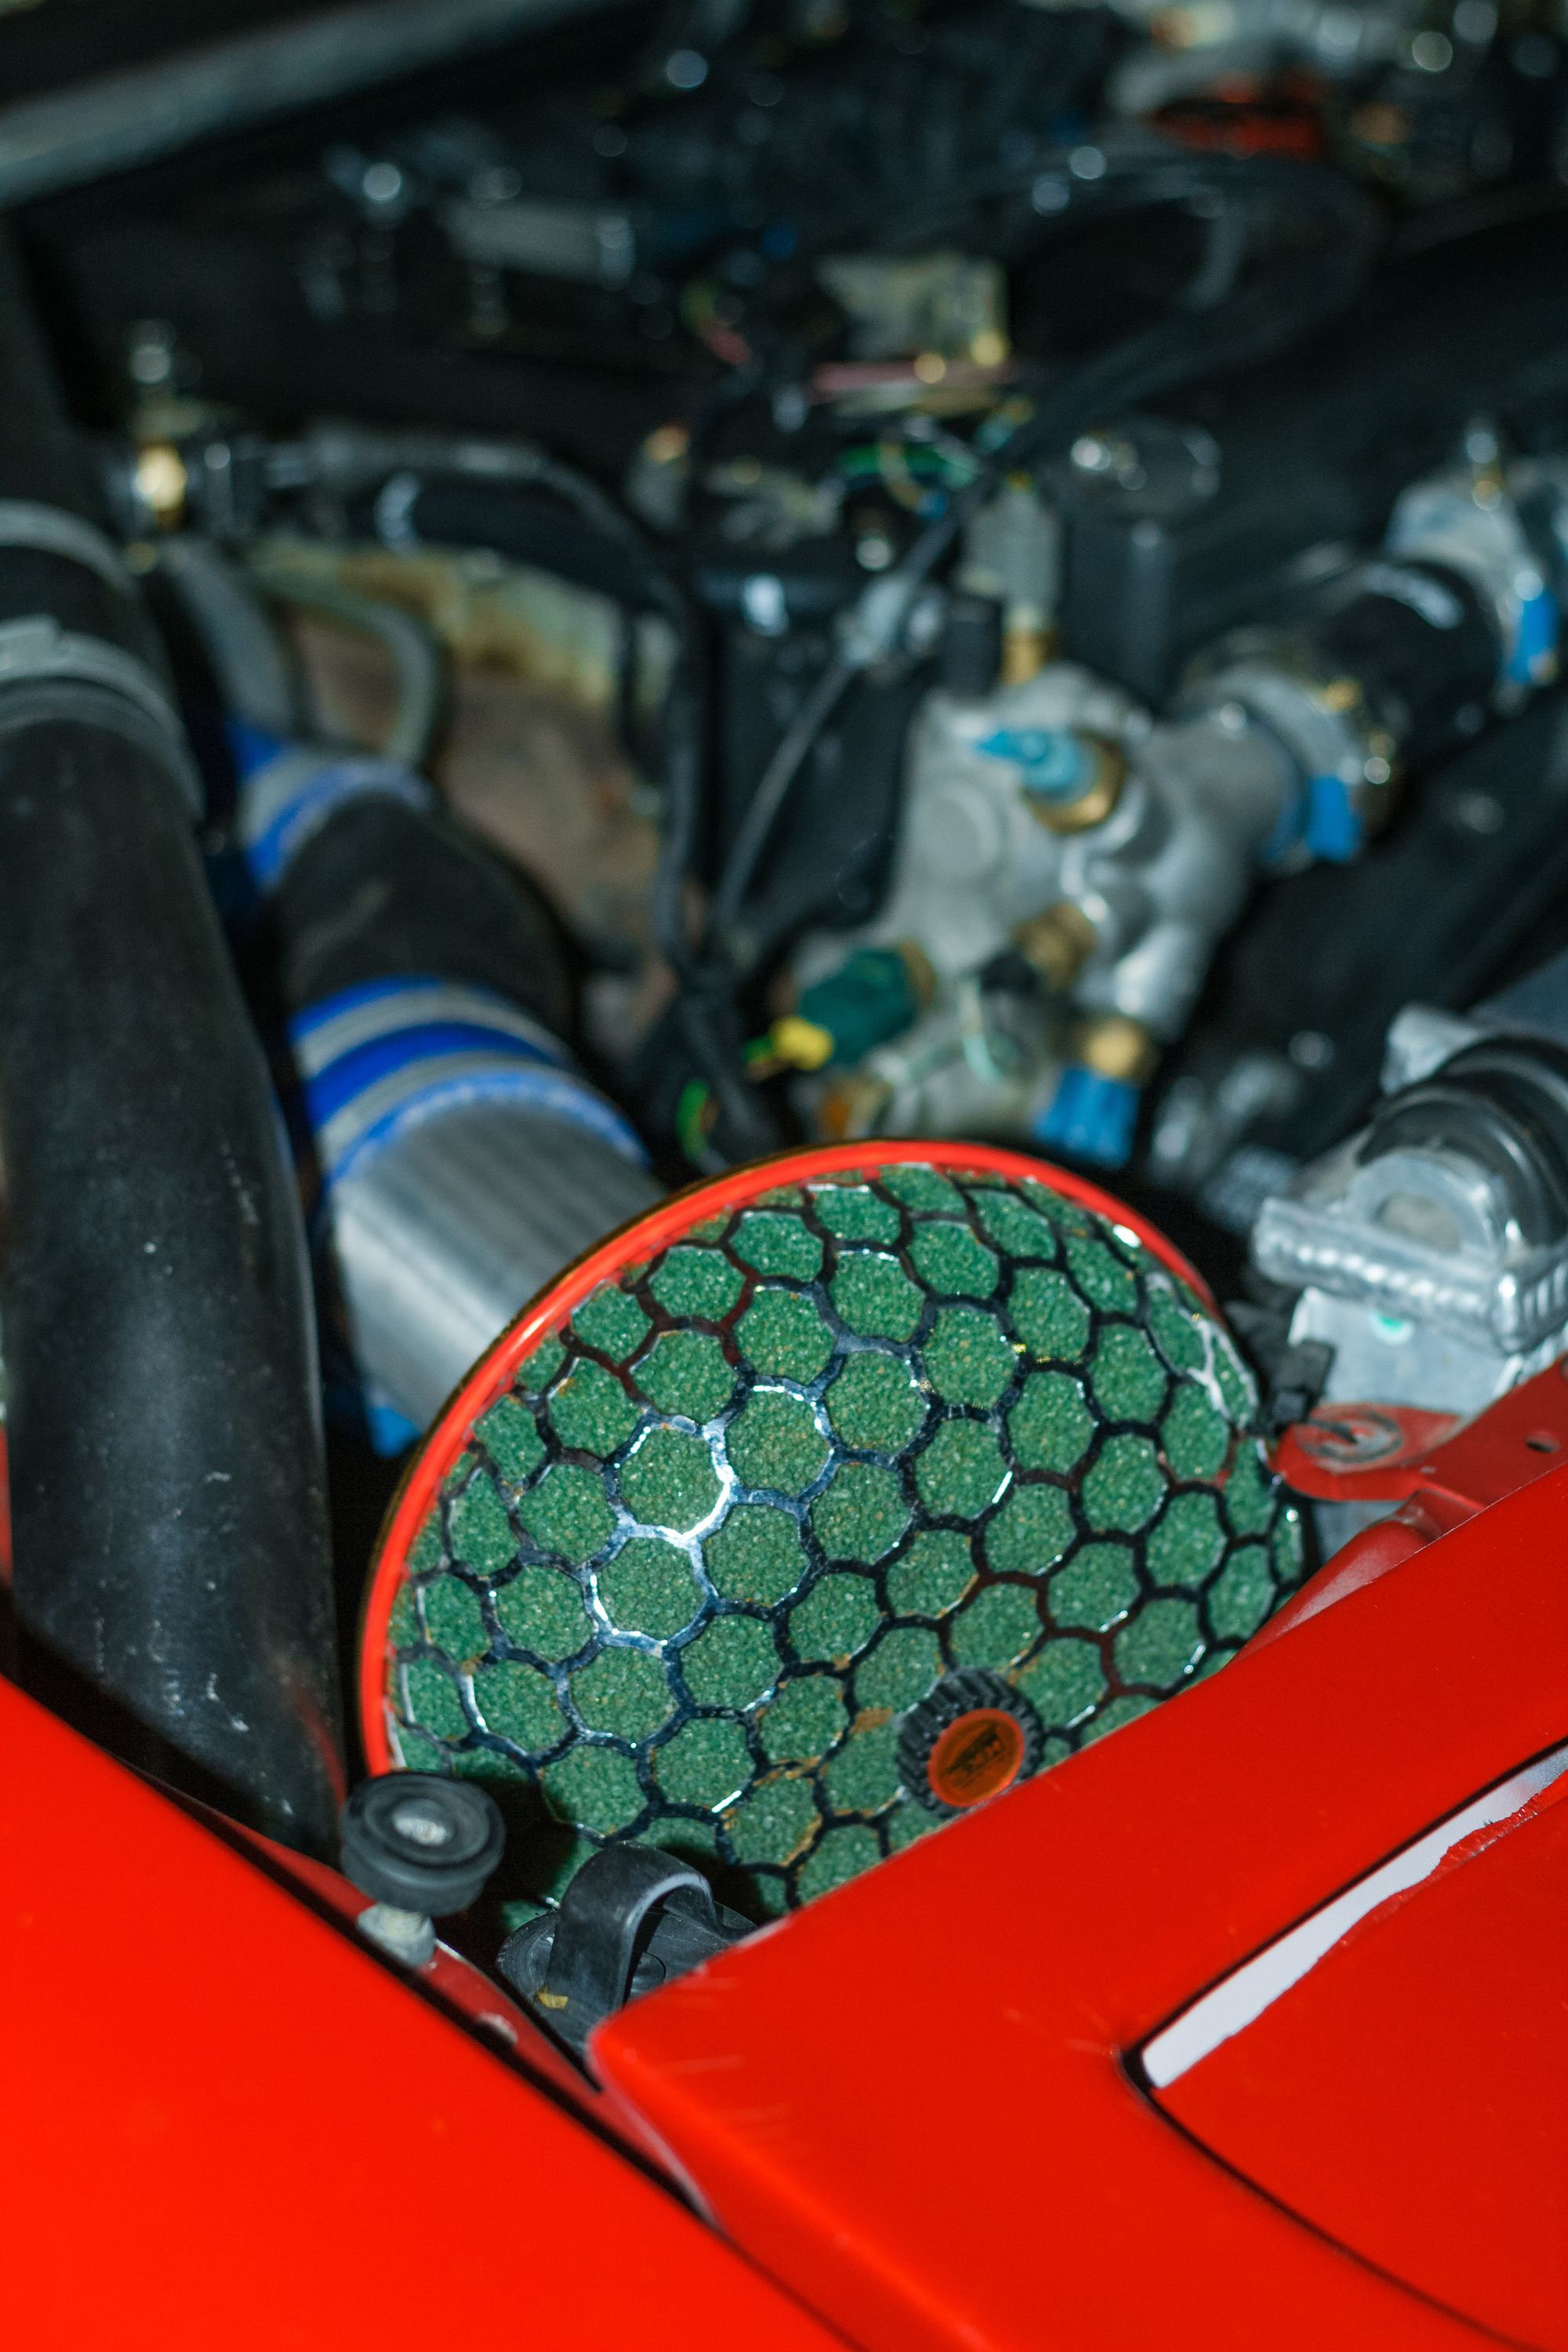 Top 5 Aftermarket Modifications to Enhance Your Car's Performance